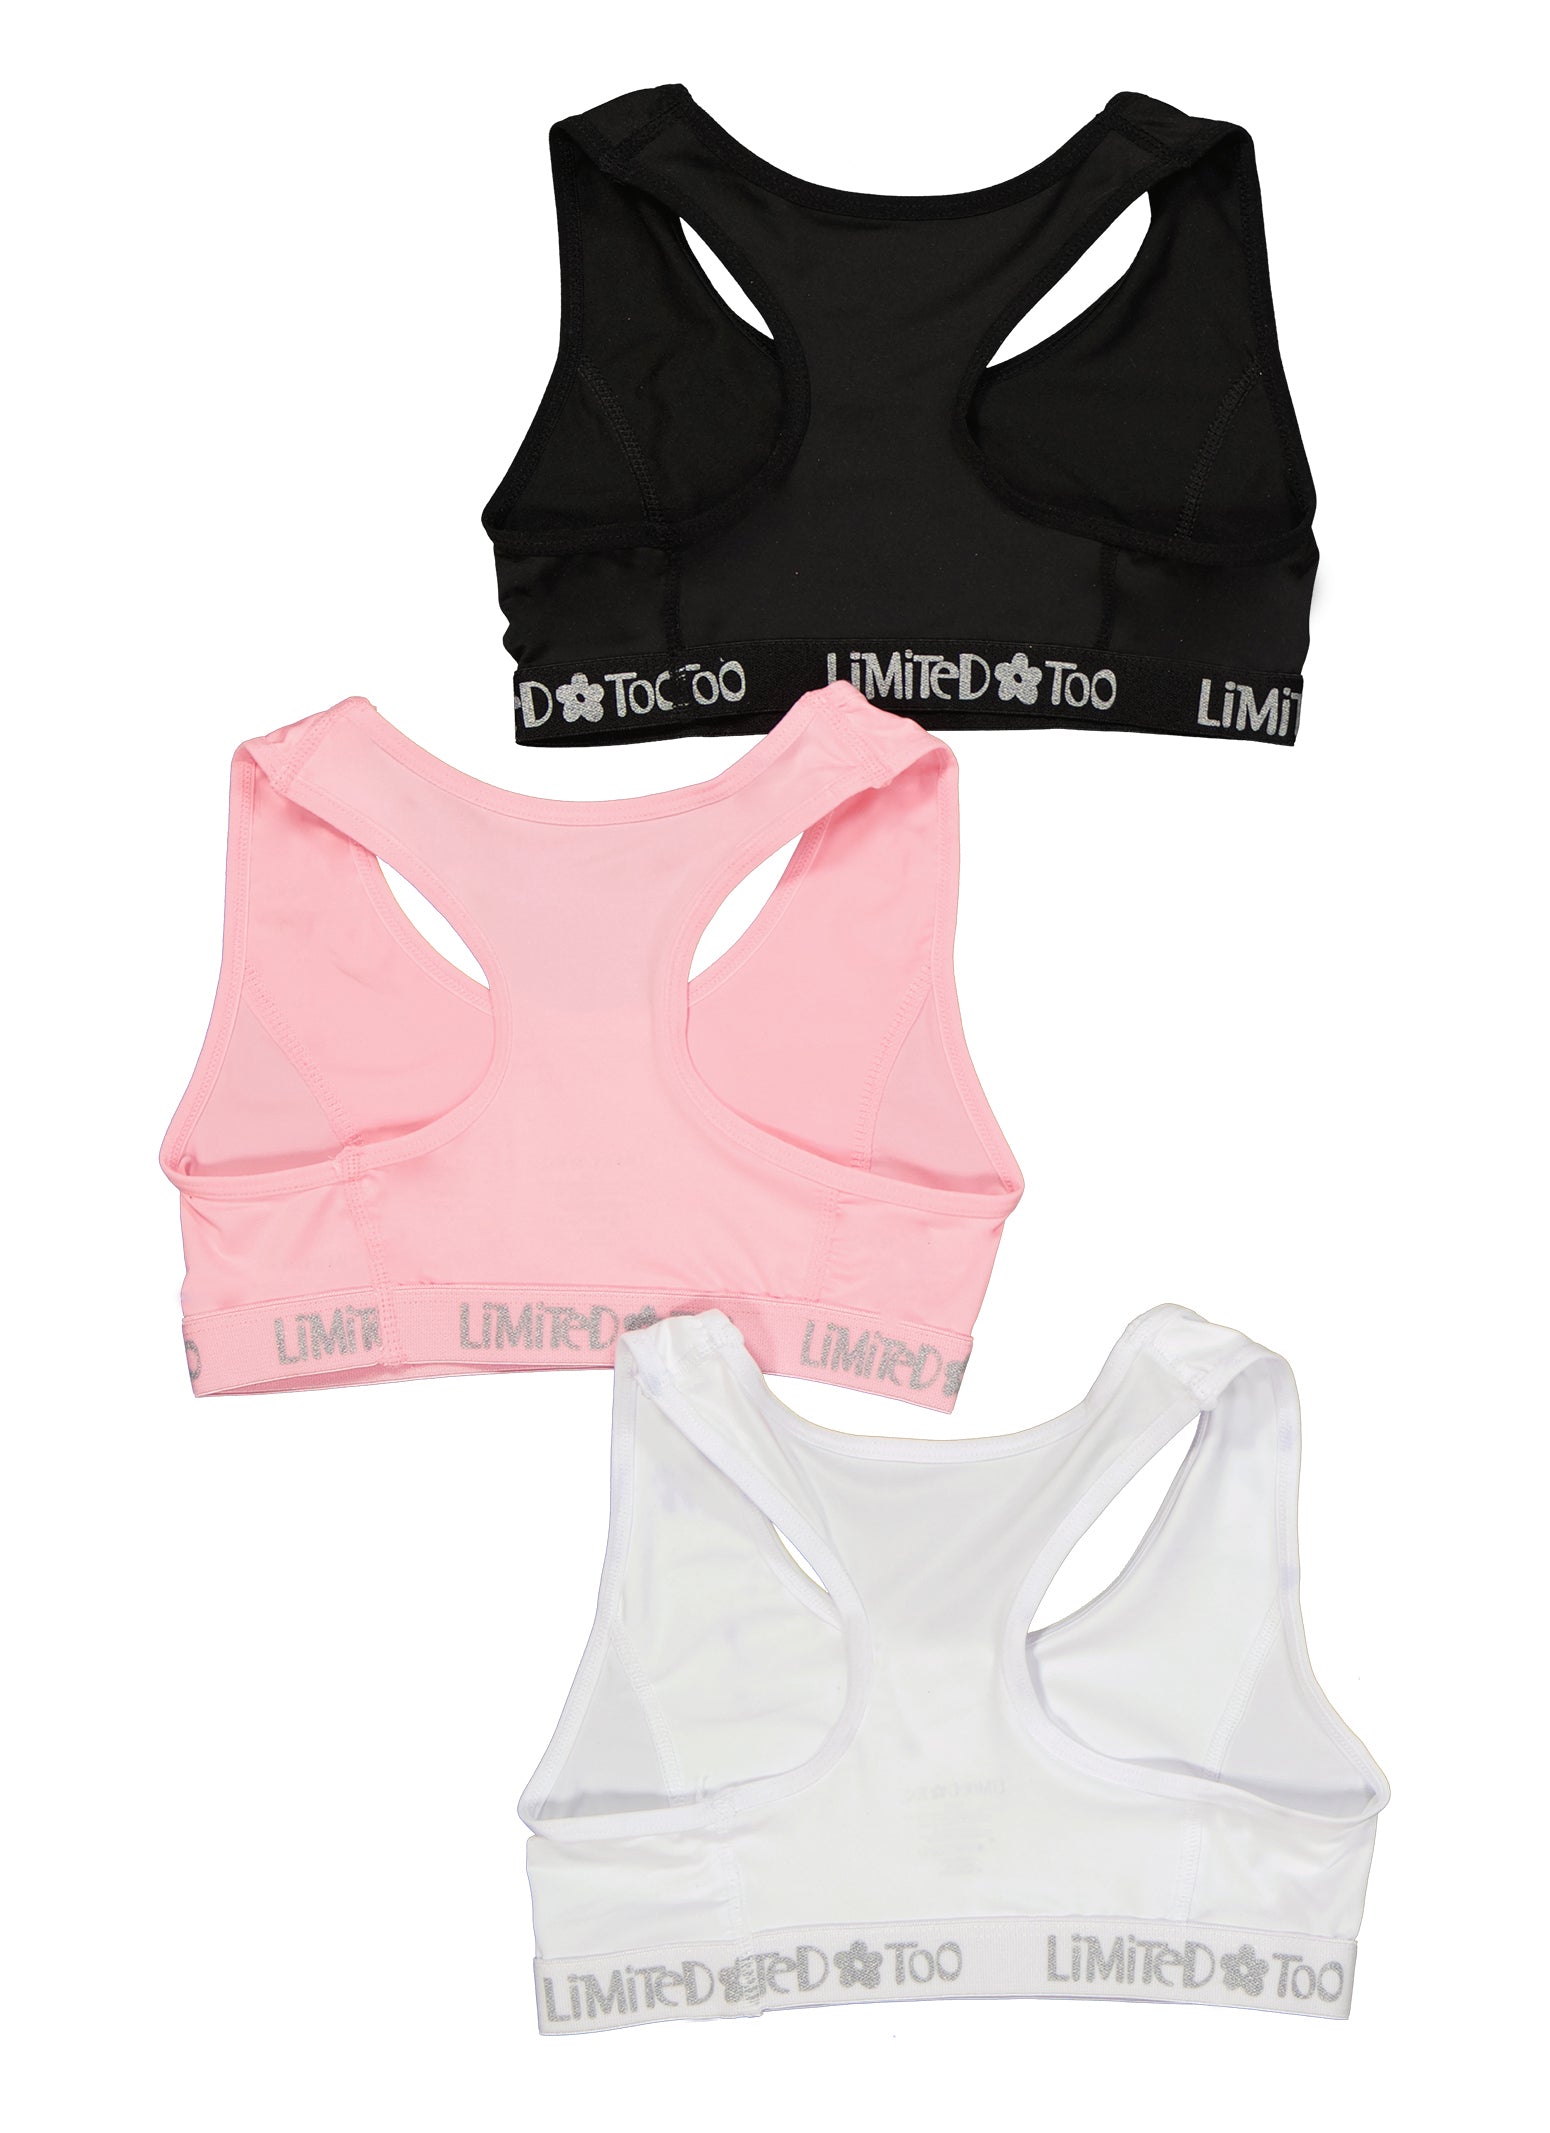 Girls Limited Too 3 Pack Sports Bras